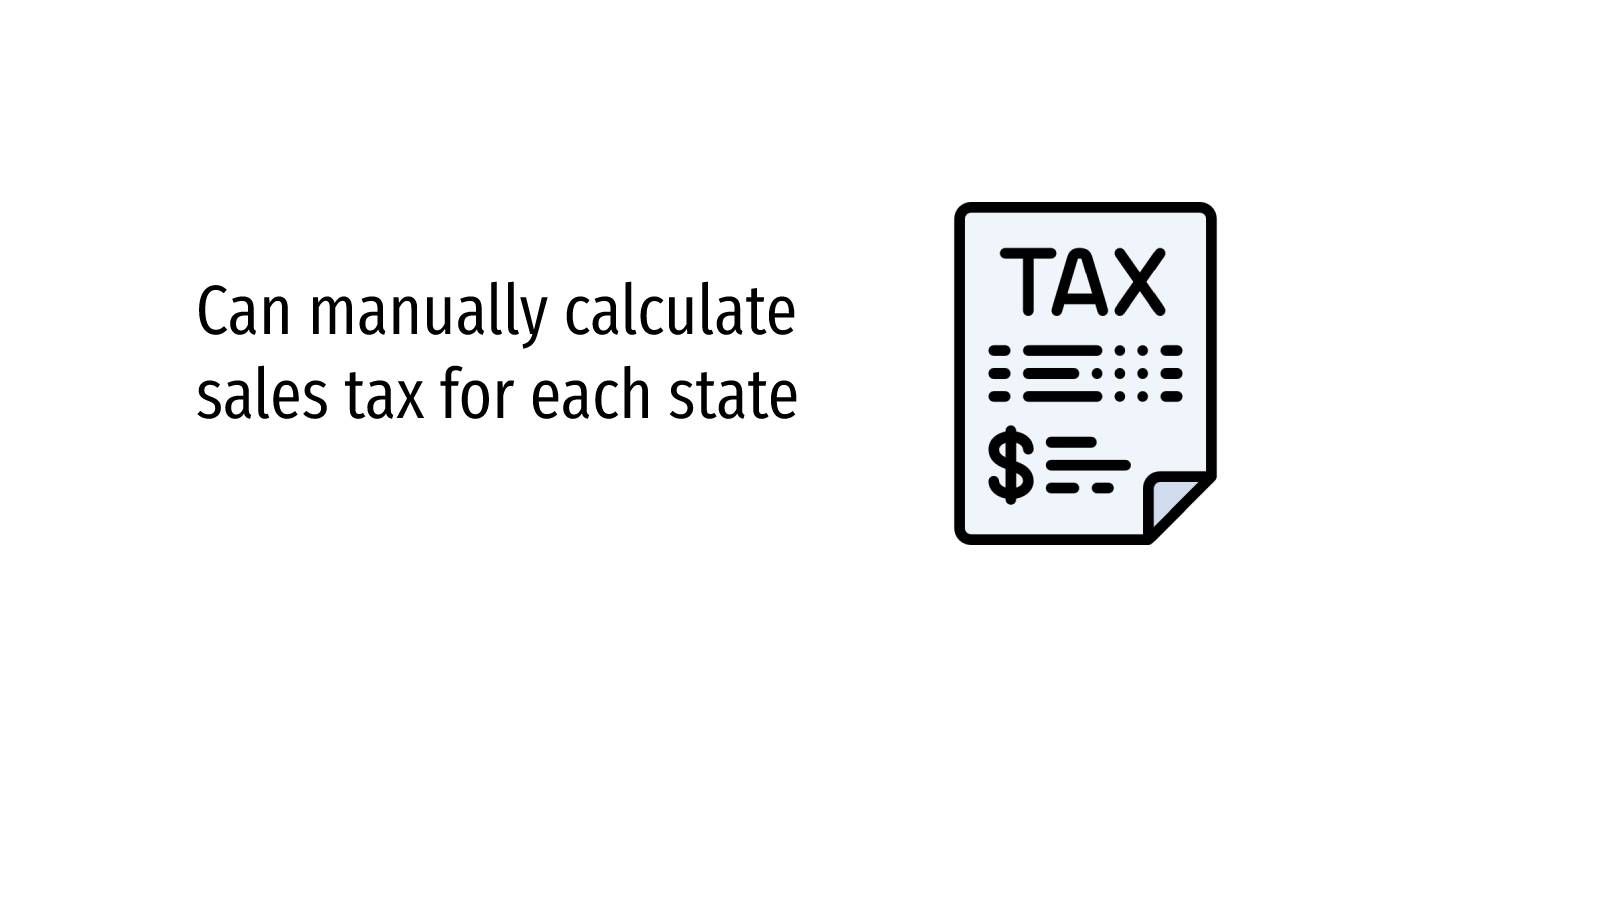 Can manually calculate sales tax for each state